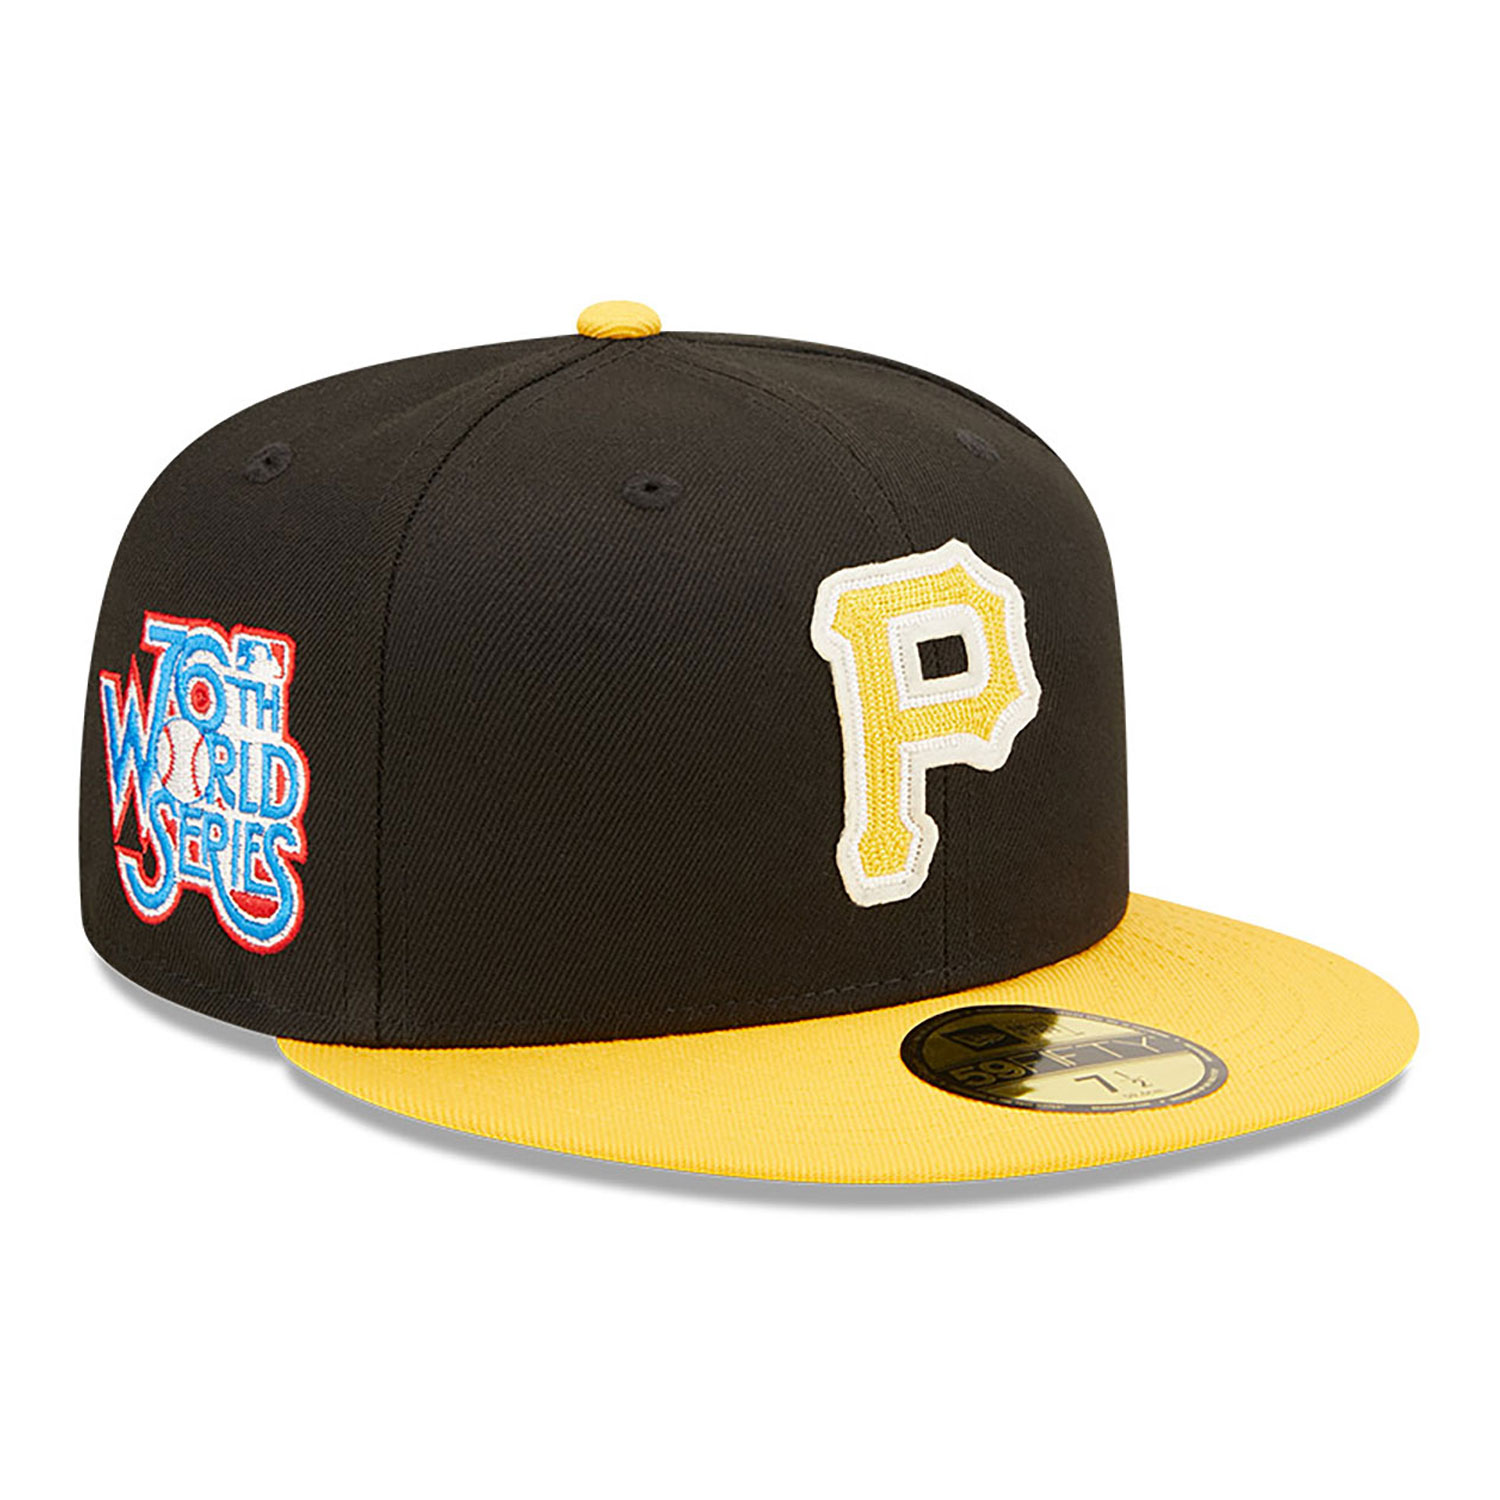 Pittsburgh Pirates NE Letterman Black 59FIFTY Fitted Cap